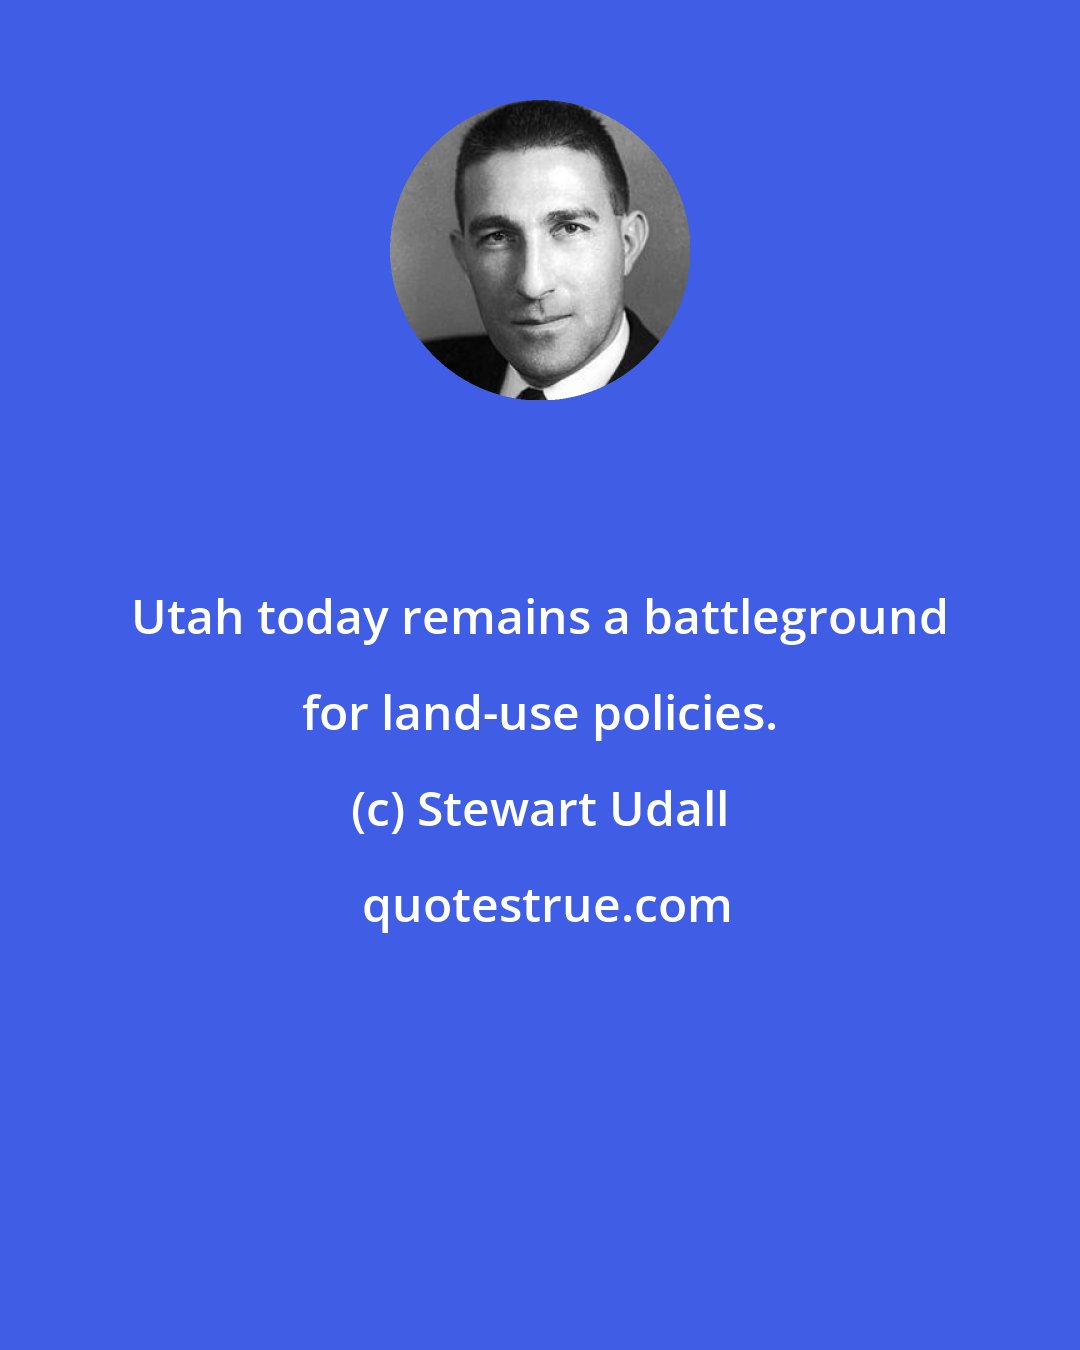 Stewart Udall: Utah today remains a battleground for land-use policies.